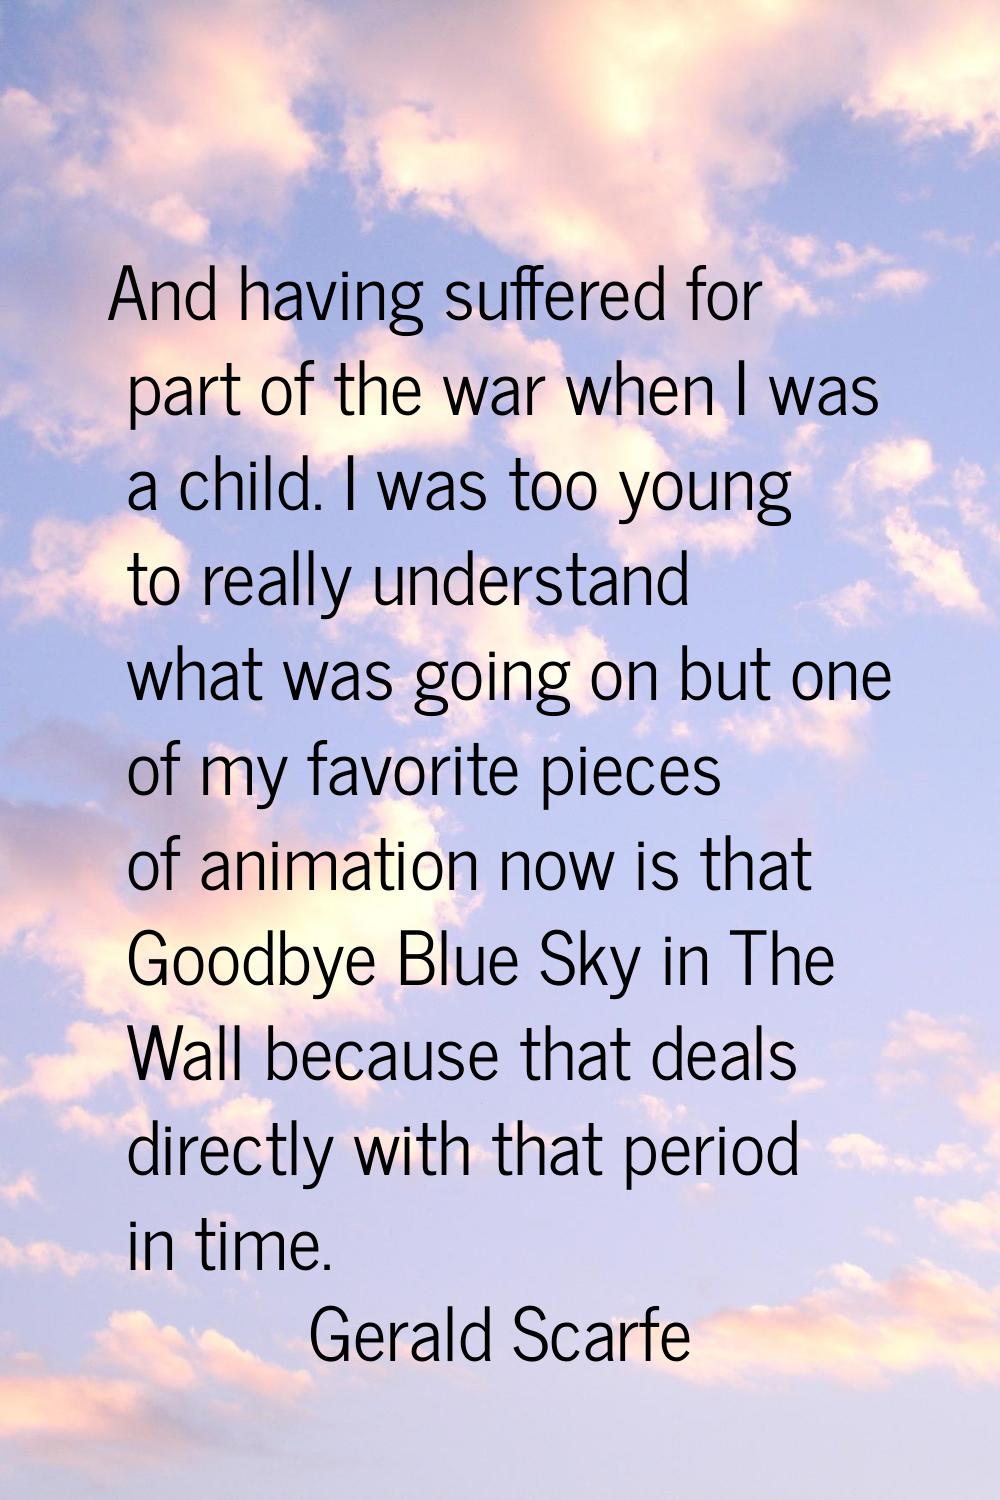 And having suffered for part of the war when I was a child. I was too young to really understand wh